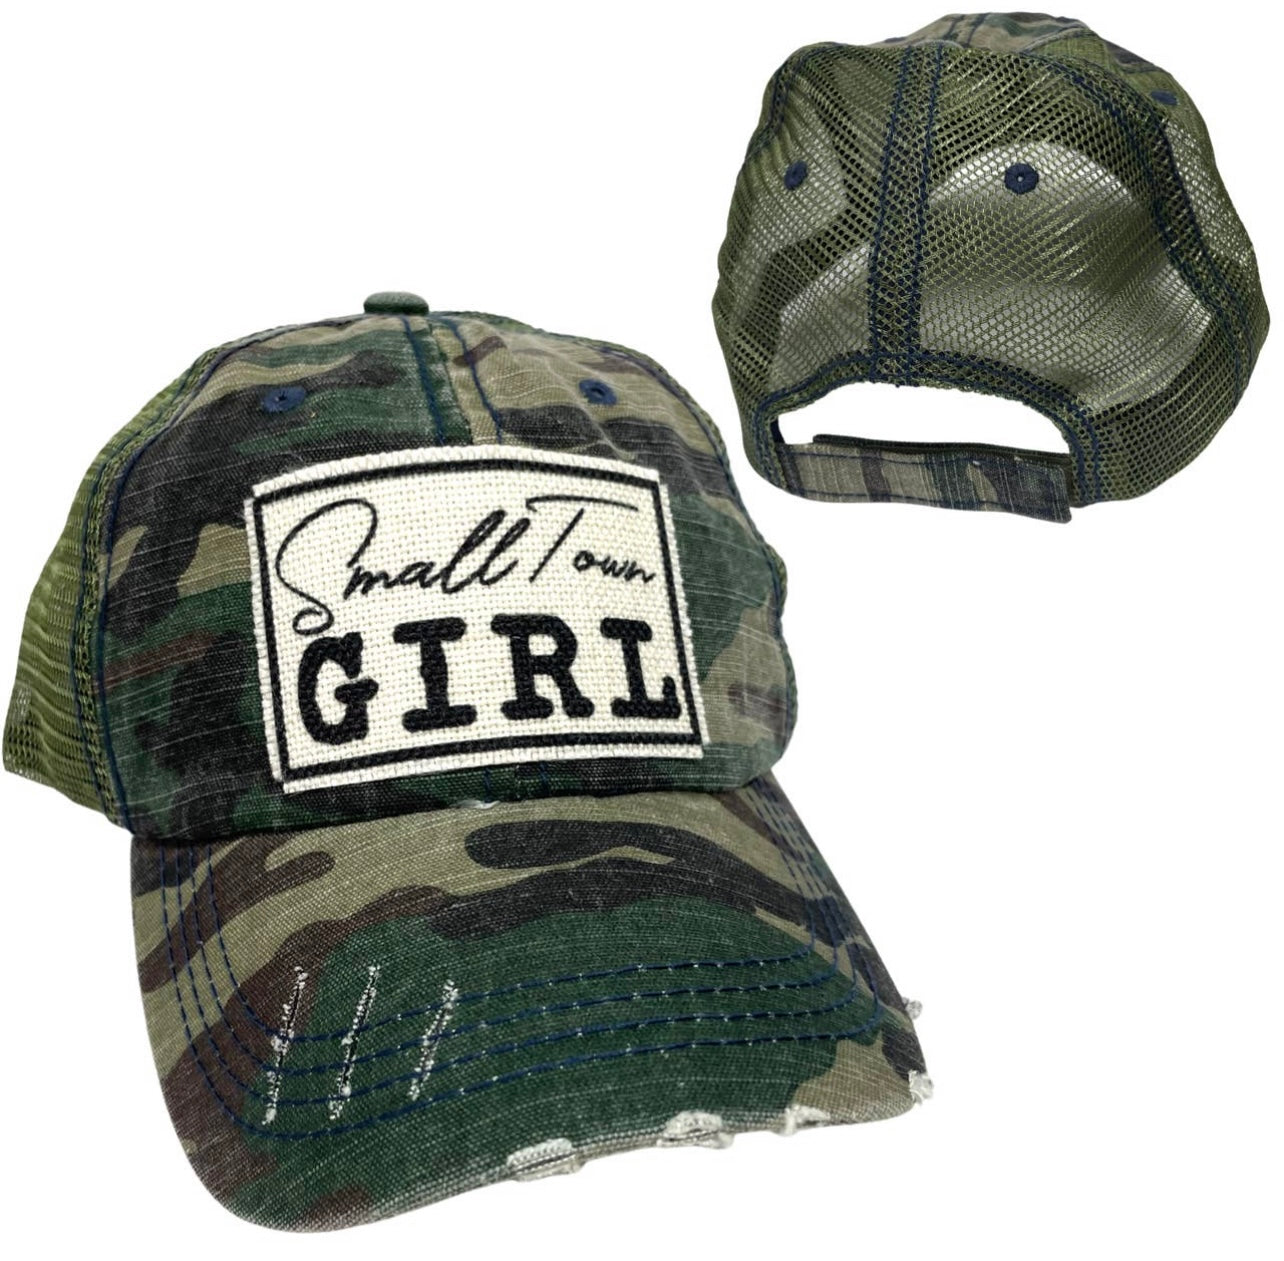 SMALL TOWN GIRL UNISEX HAT